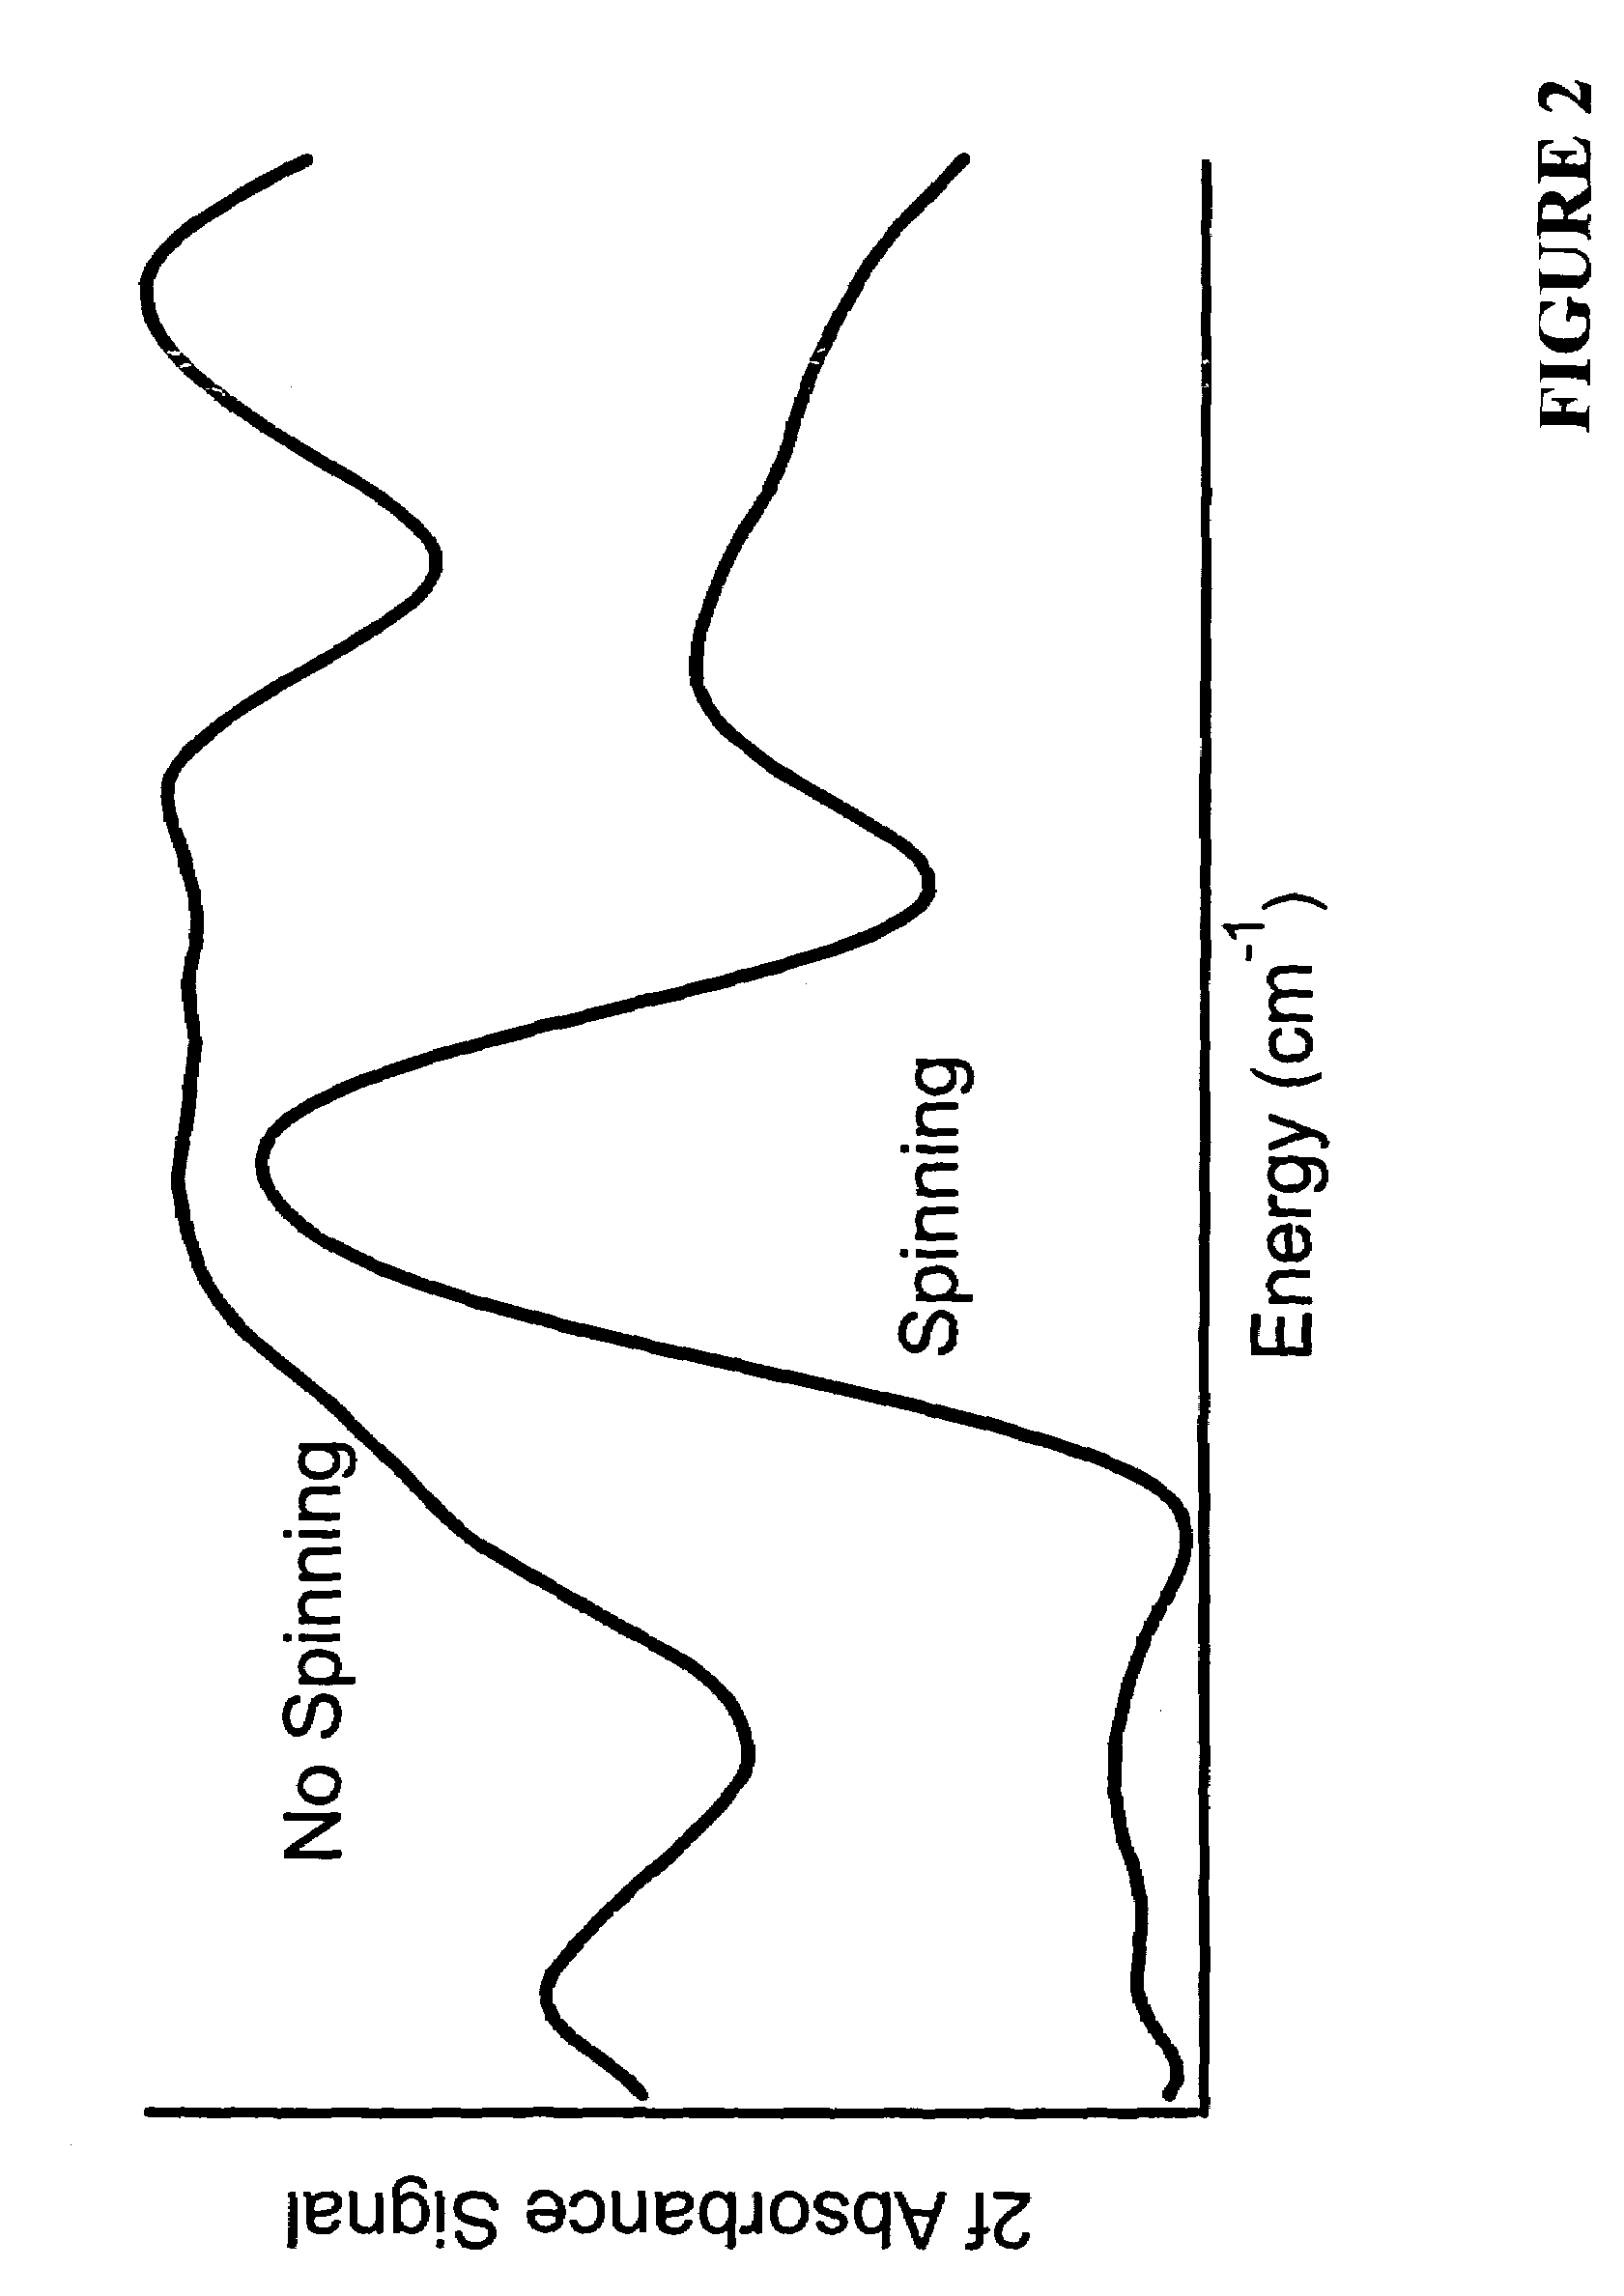 Optical absorbance sensitivity and reliability improvement via rotation of sample container